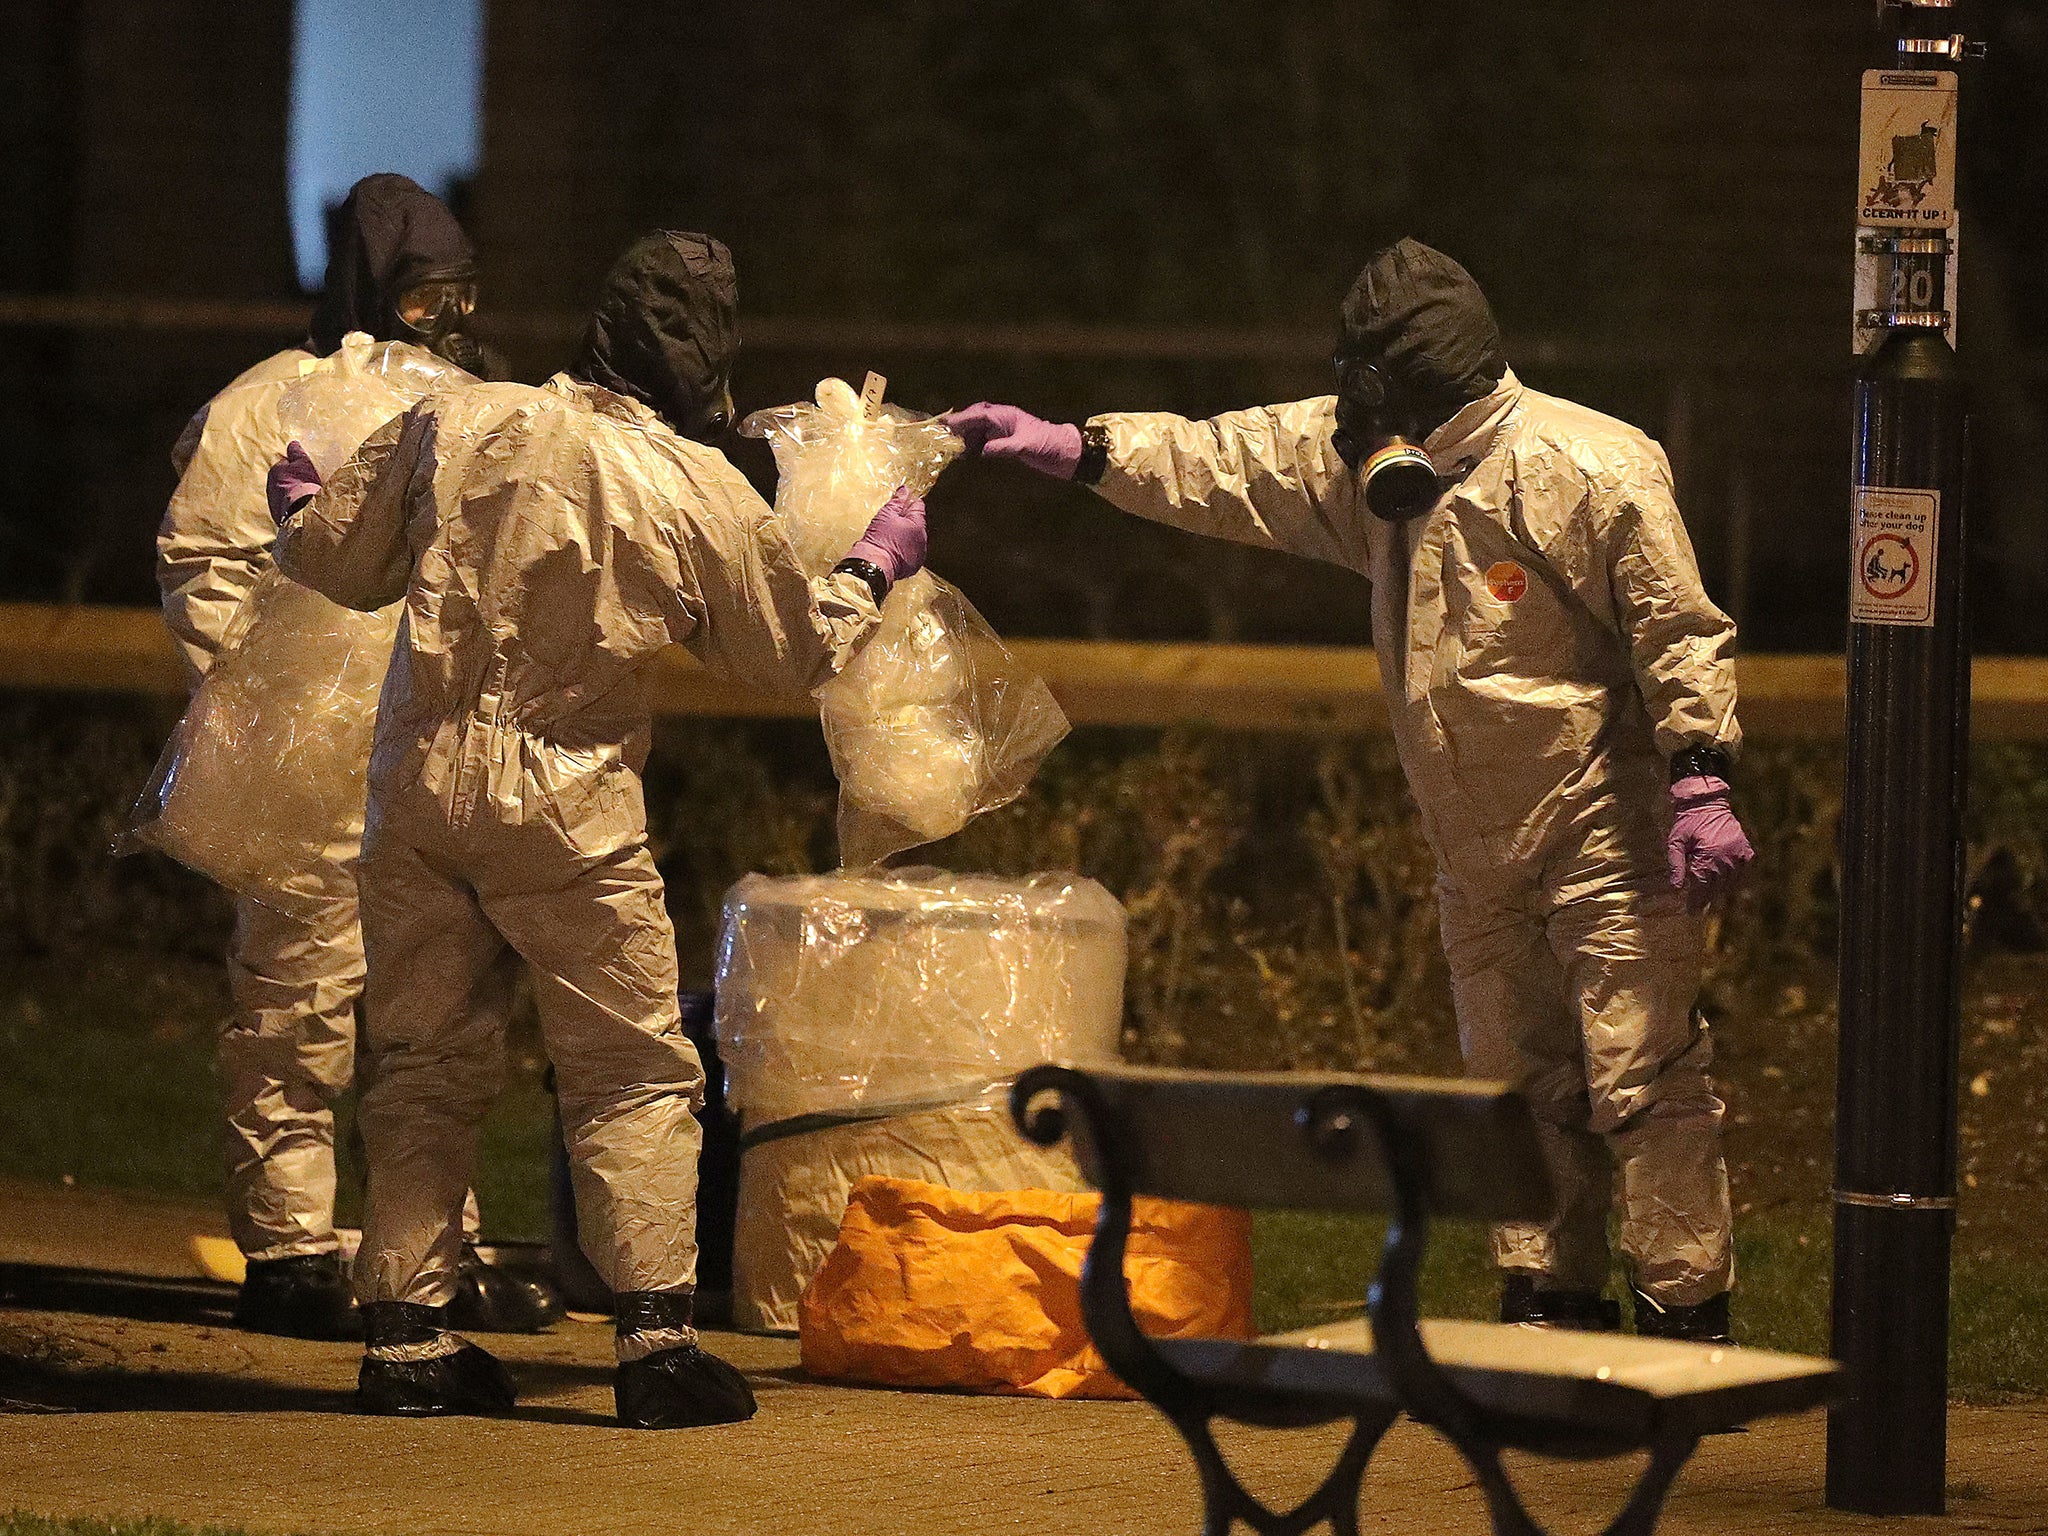 The journalist says the official story of the novichok poisoning ‘has not held up very well’ and says it is more likely Russian organised crime rather than state-sponsored action